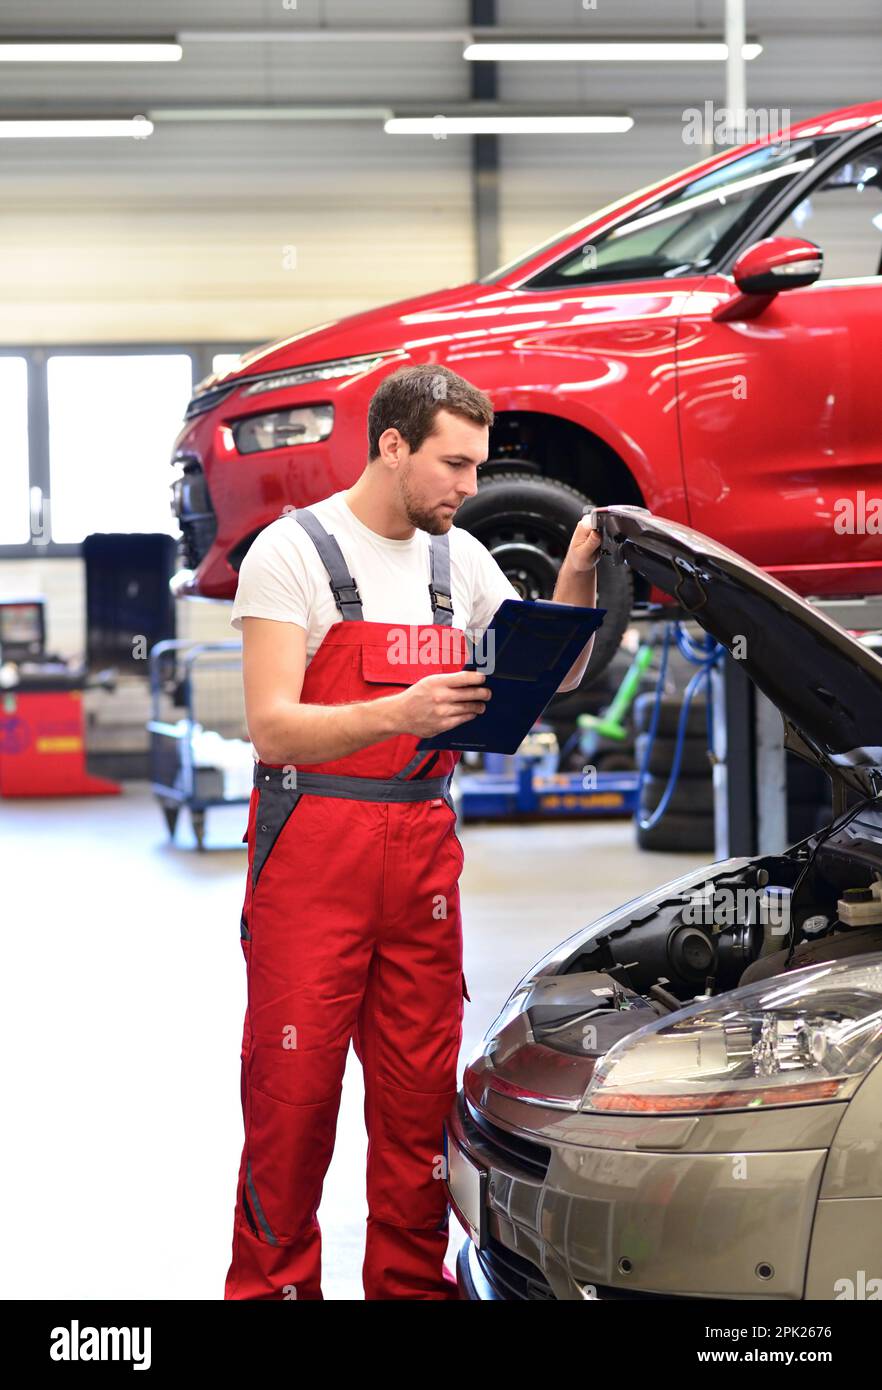 car mechanic in a workshop repairing a vehicle Stock Photo